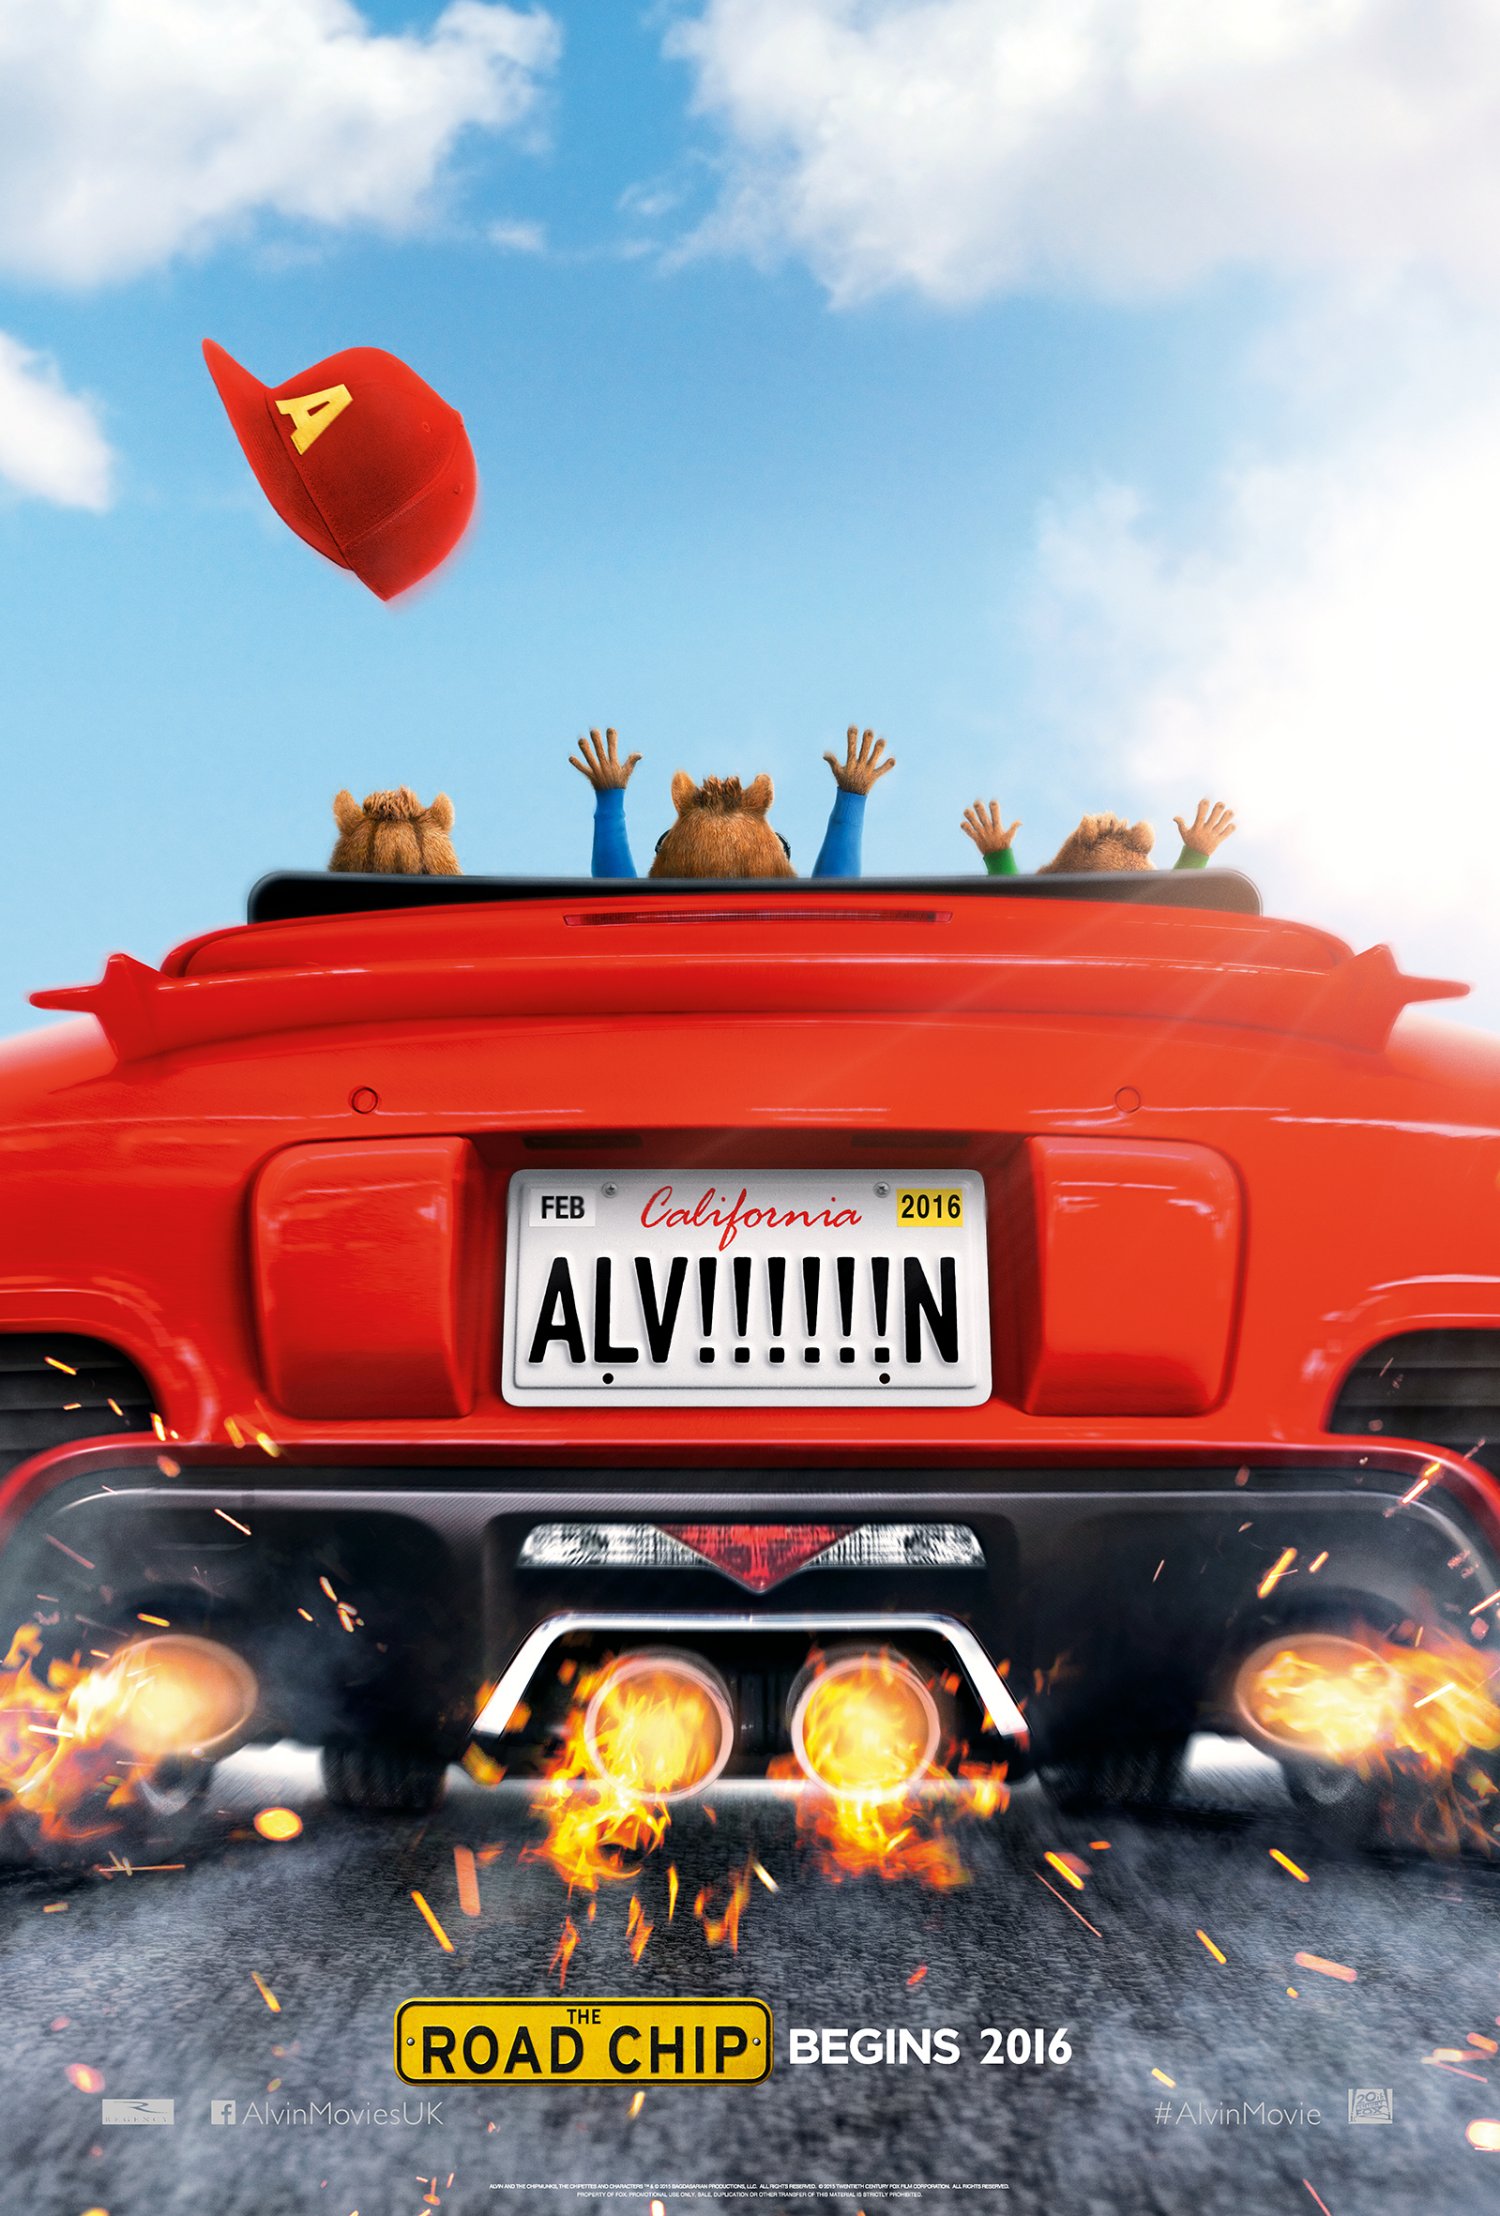 ALVIN & THE CHIPMUNKS THE ROAD CHIP